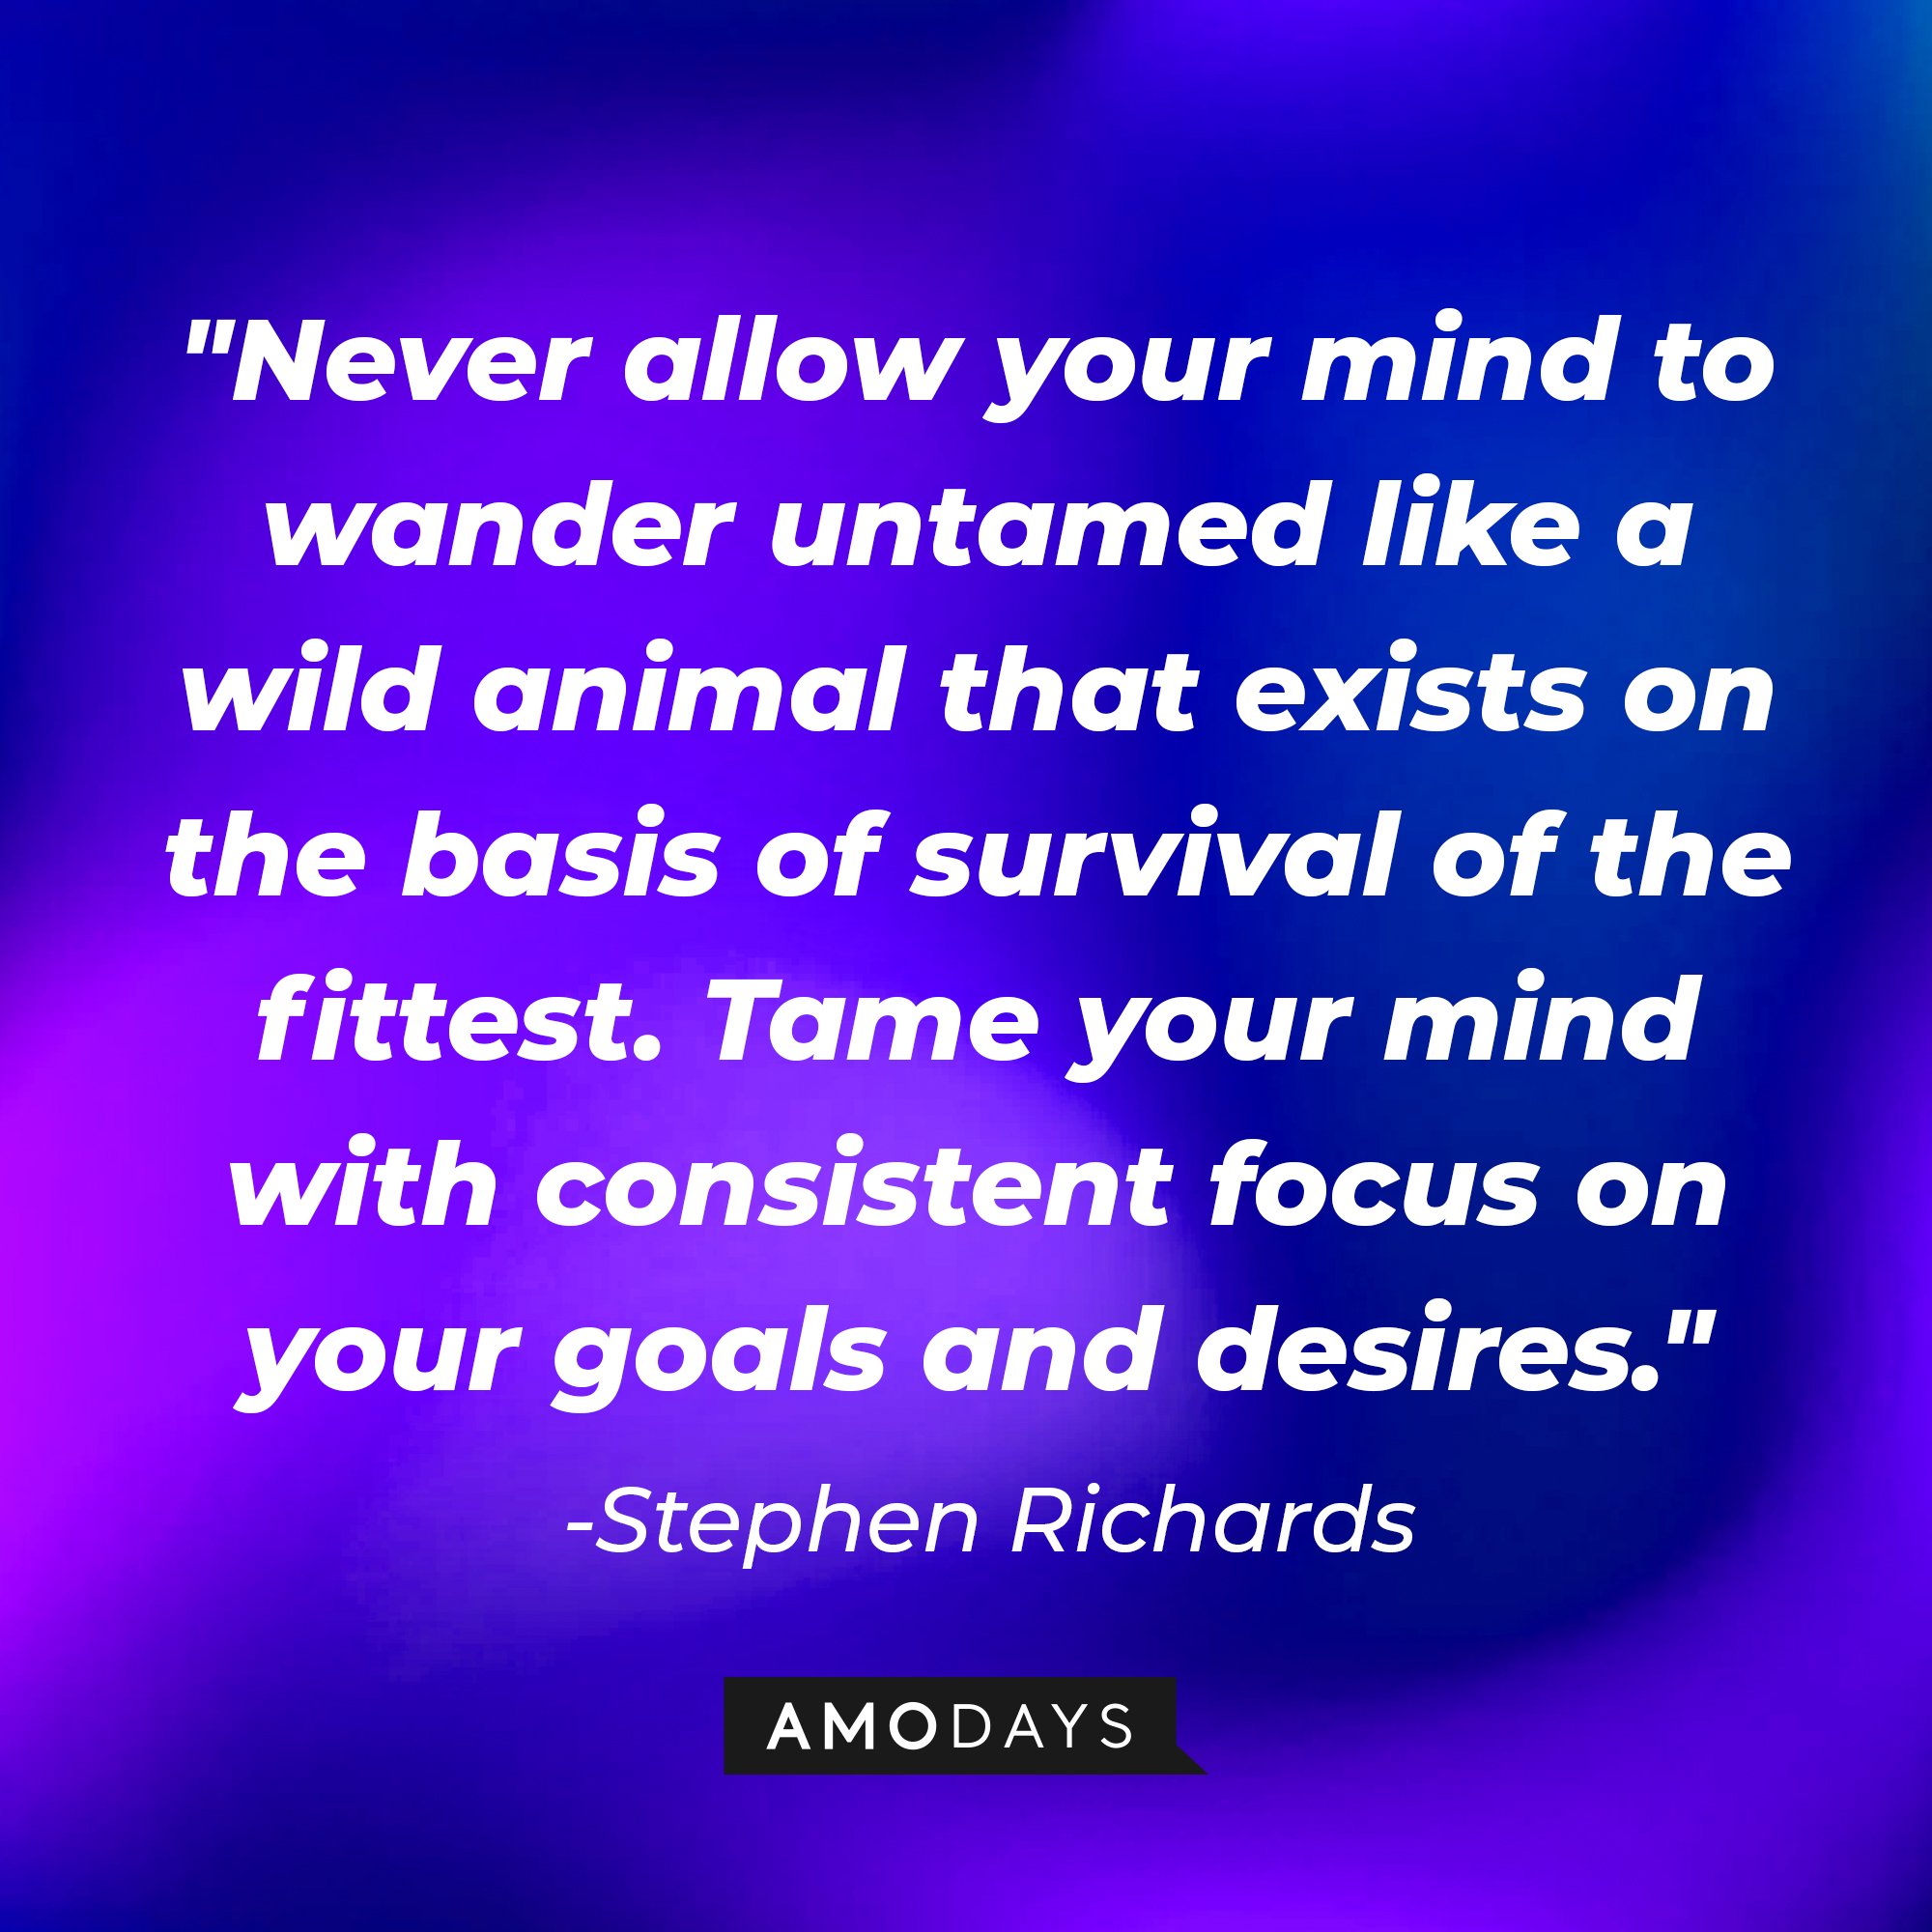 Stephen Richards' quote: "Never allow your mind to wander untamed like a wild animal that exists on the basis of survival of the fittest. Tame your mind with consistent focus on your goals and desires." | Image: AmoDays